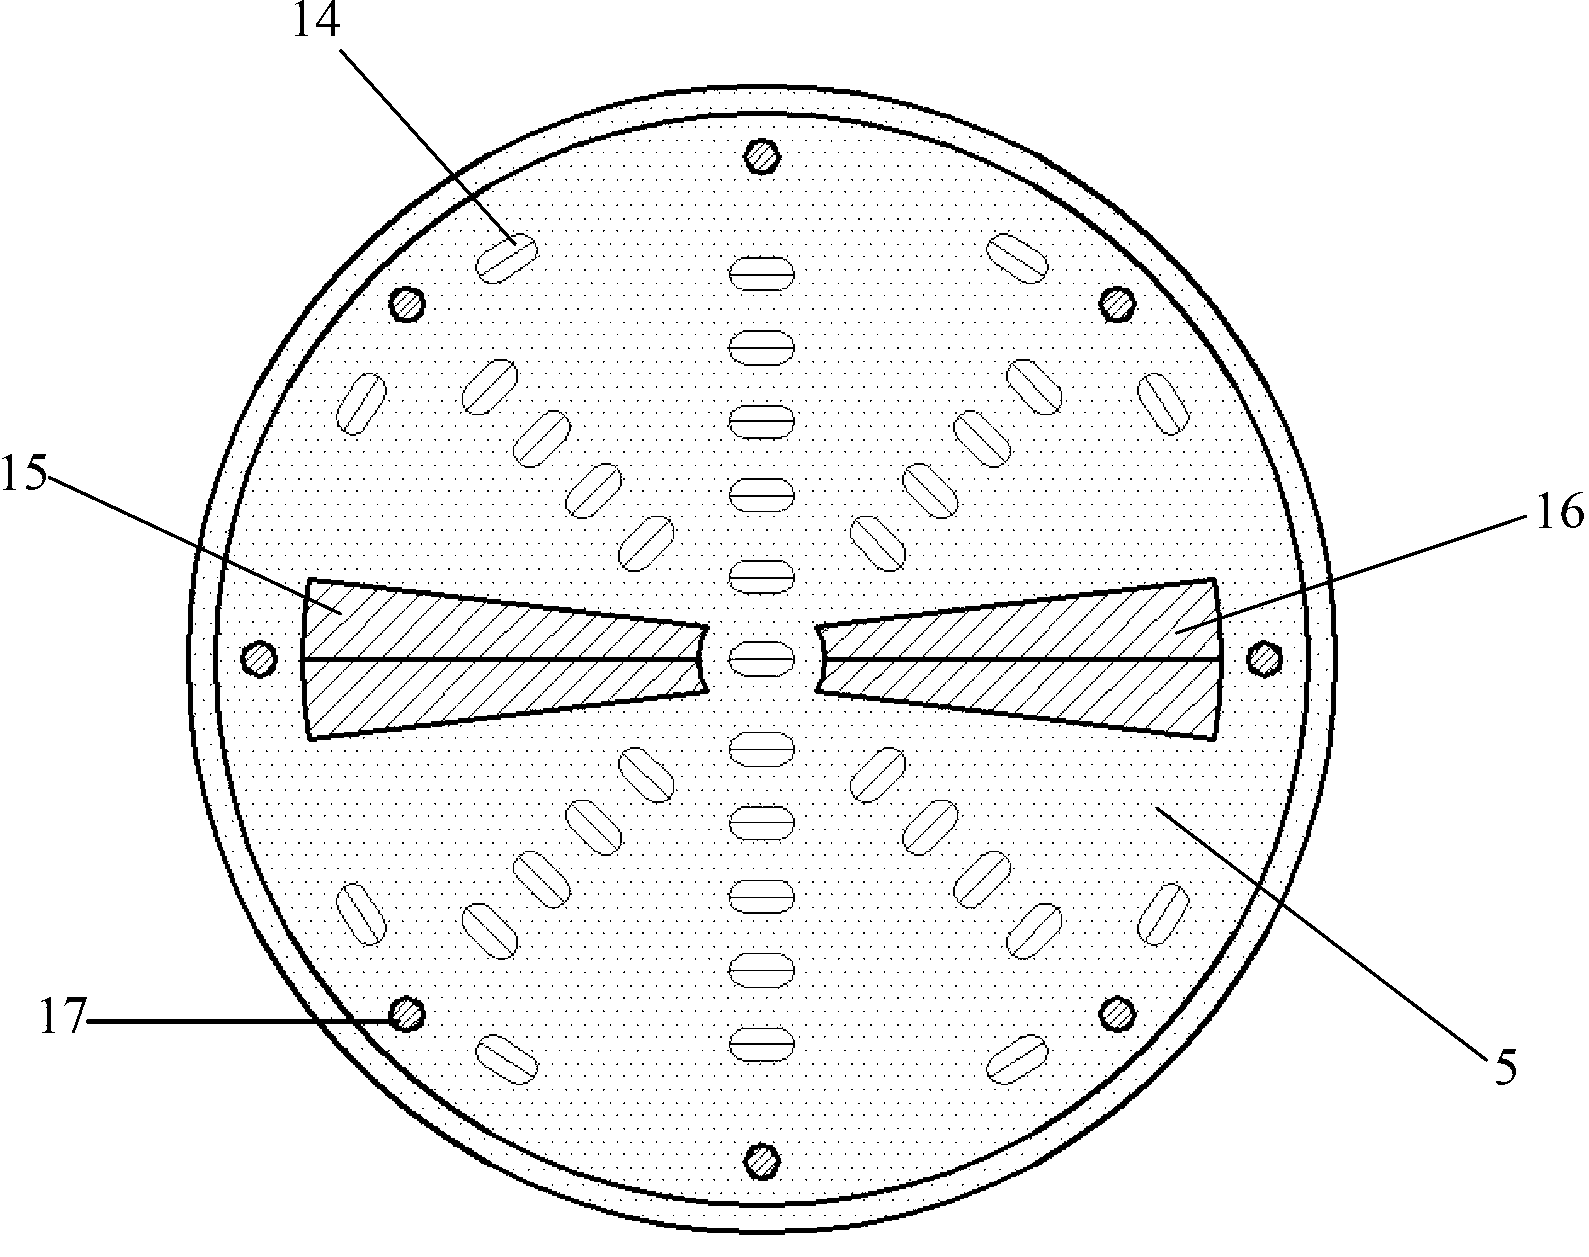 Advanced detection system and method for TBM (Tunnel Boring Machine) tunnel construction based on forward three-dimensional induced polarization